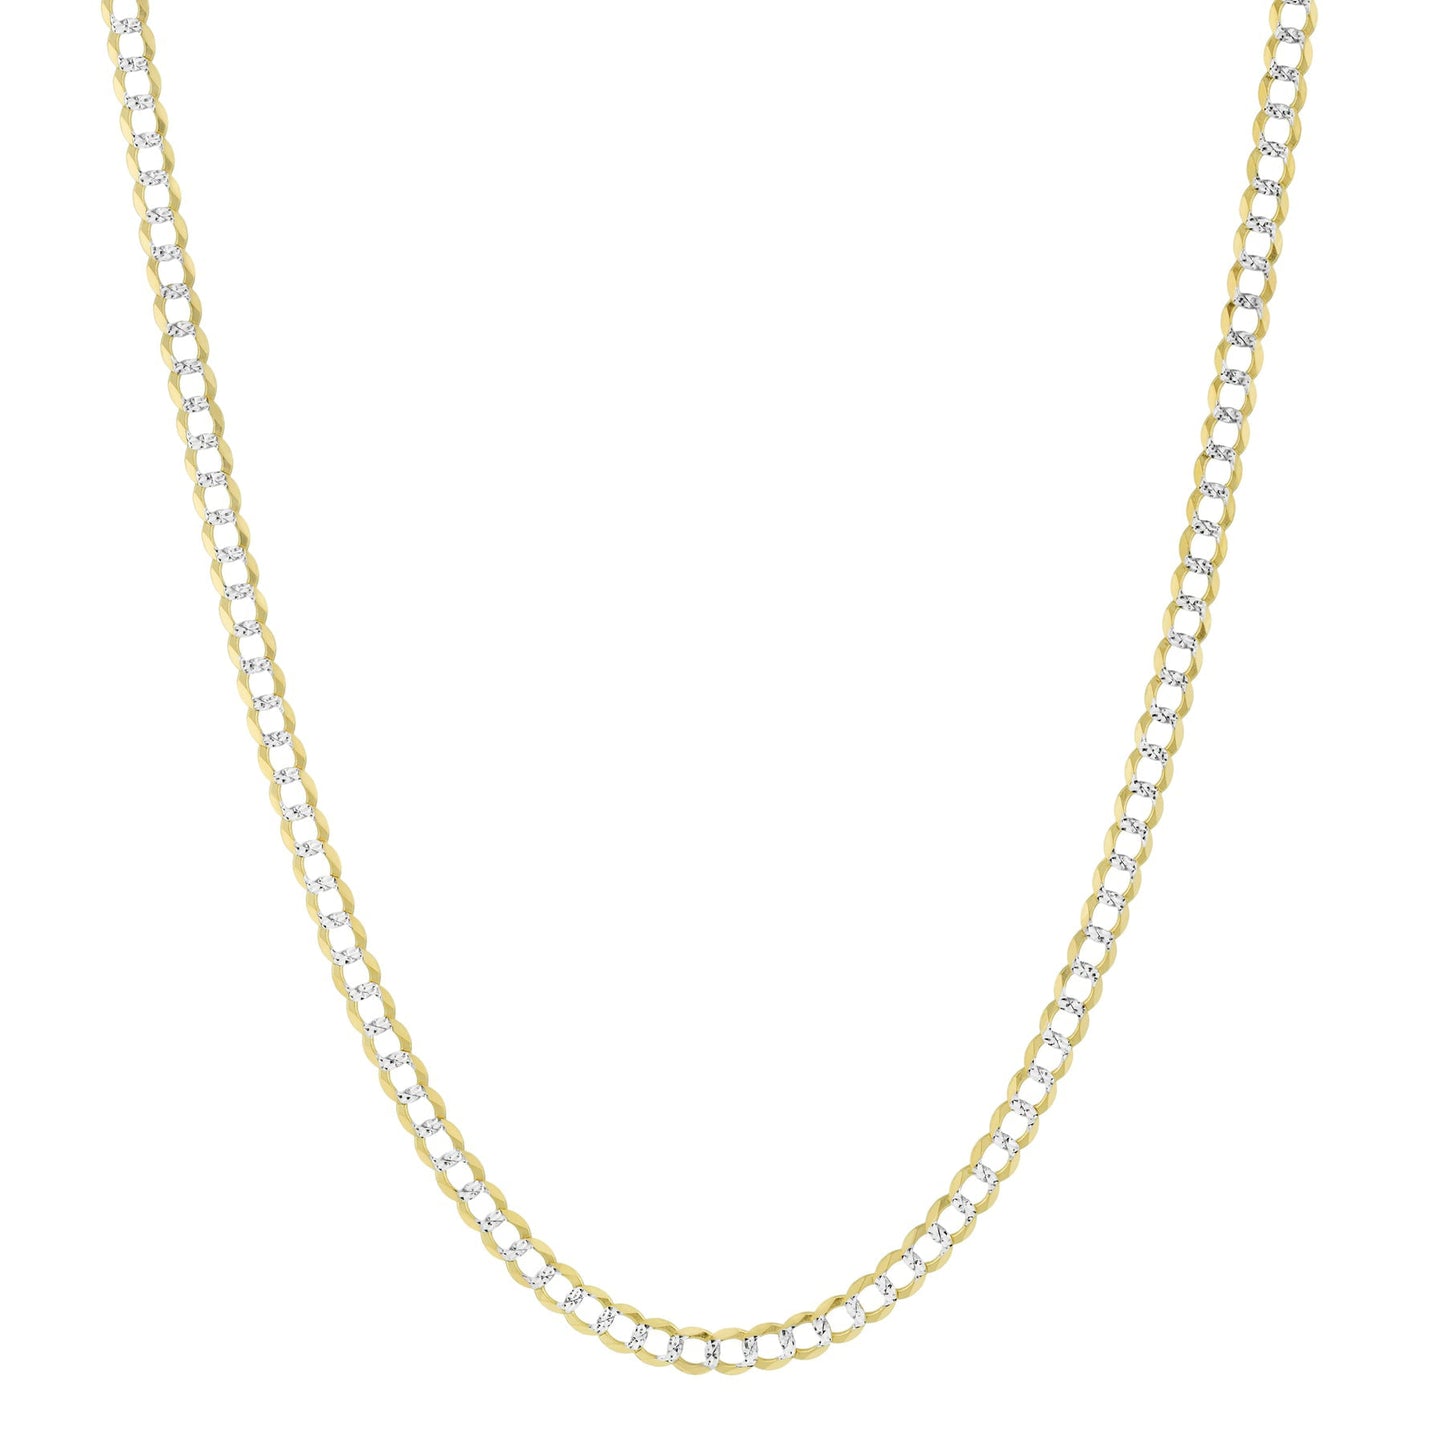 14K Yellow Gold 3.5MM Solid Cuban Curb Link Two-Tone Pave ChainGold Jewelry,Mens JewelryWomens Jewelry,Fine Jewelry,Fashion Jewelry14K Gold Jewelry,Jewelry GiftsHoliday Gifts,Mothers Day Gifts,Fathers Day Gifts,Gifts for MomGifts for Dad,Gifts for Her,Gifts for Him,Fancy Jewelry